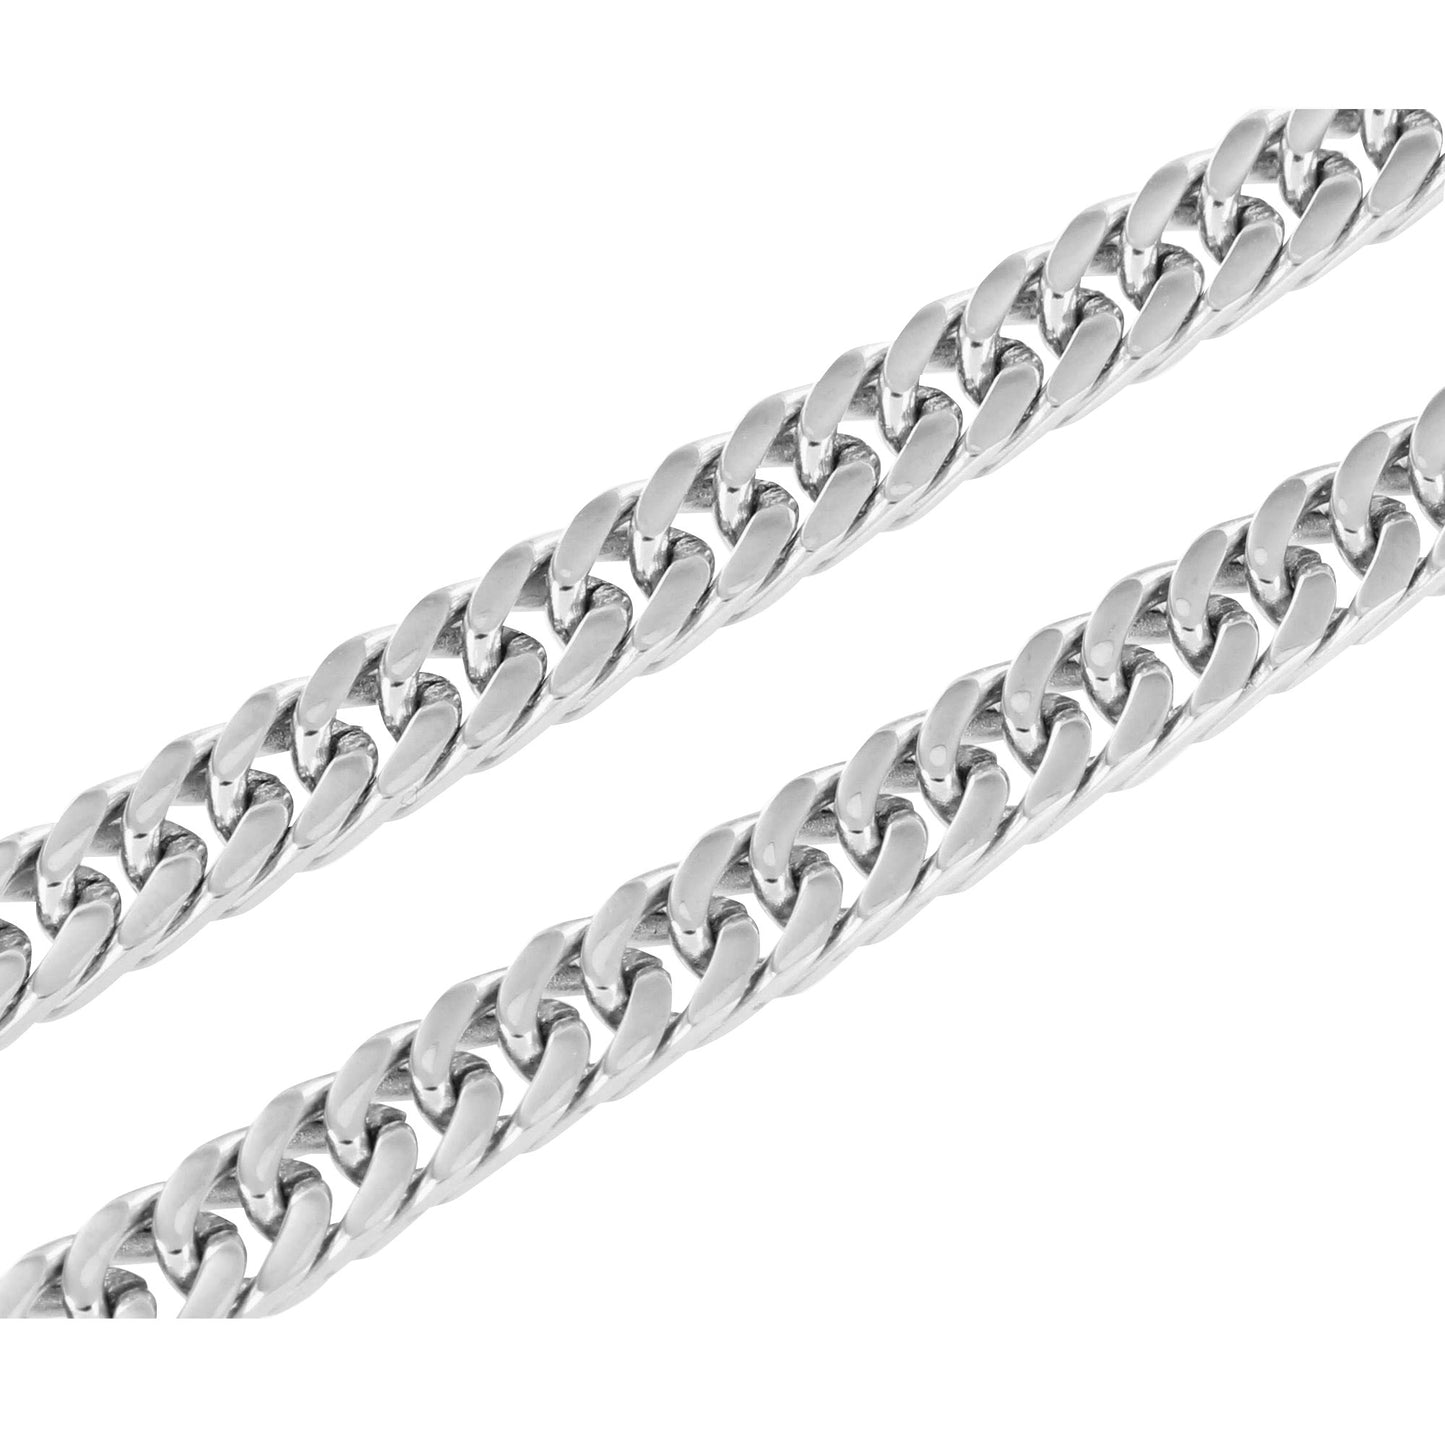 Miami Cuban Stainless Steel White Gold Finish 4 MM 30" Chain